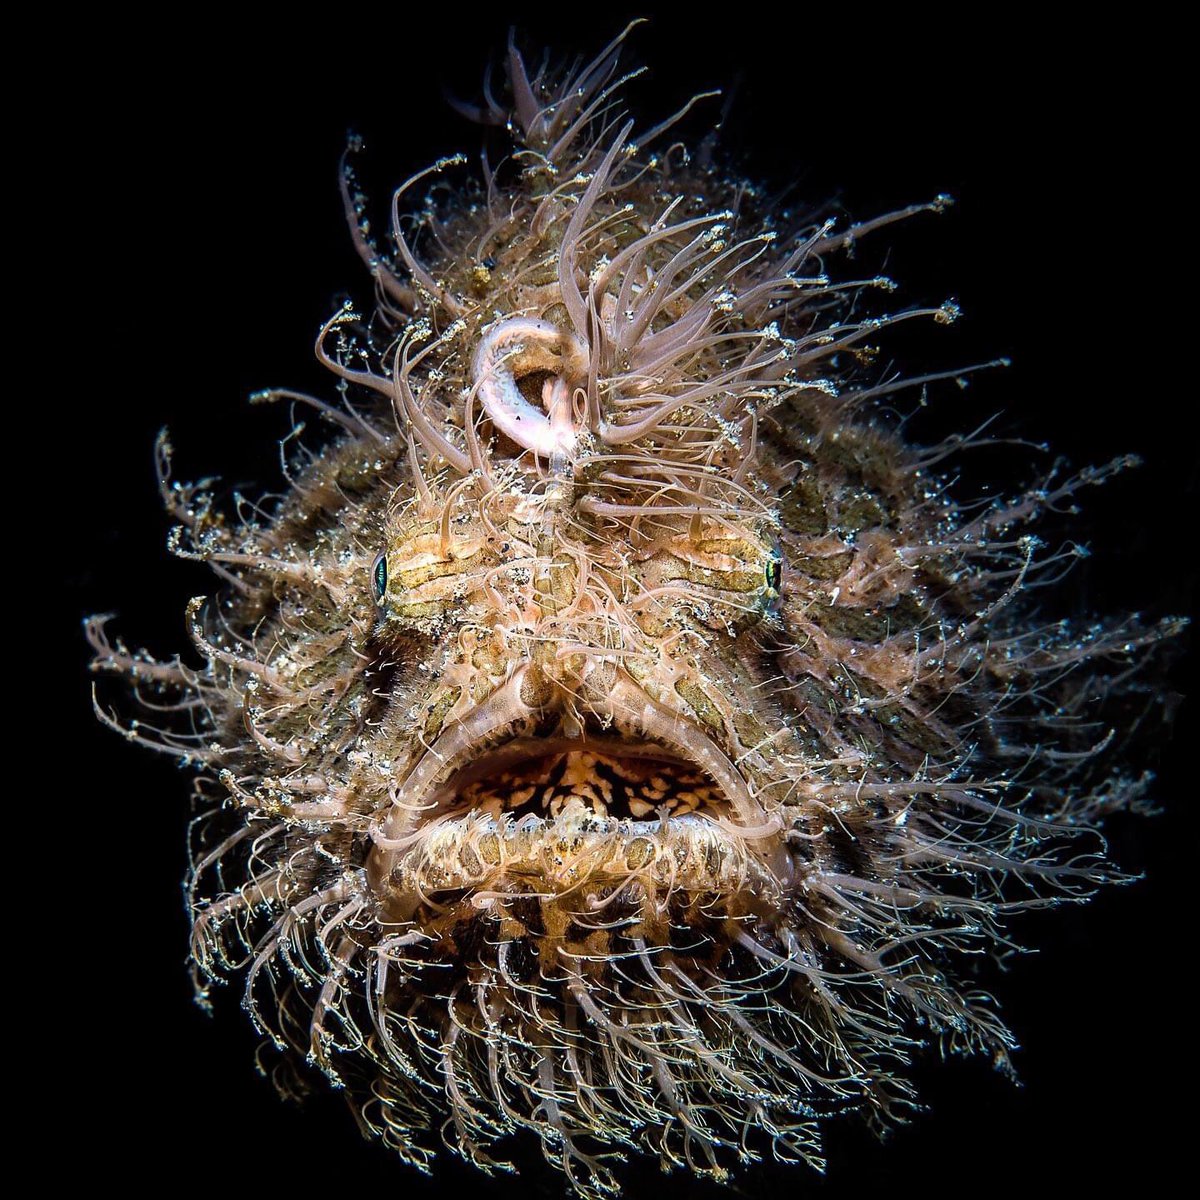 Hairy Frogfish jump by sucking in water through the mouth and expelling it in jets through the small gill openings behind their “legs” #DidYouKnow #savetheplanet #savetheearth #nature #MarineLife